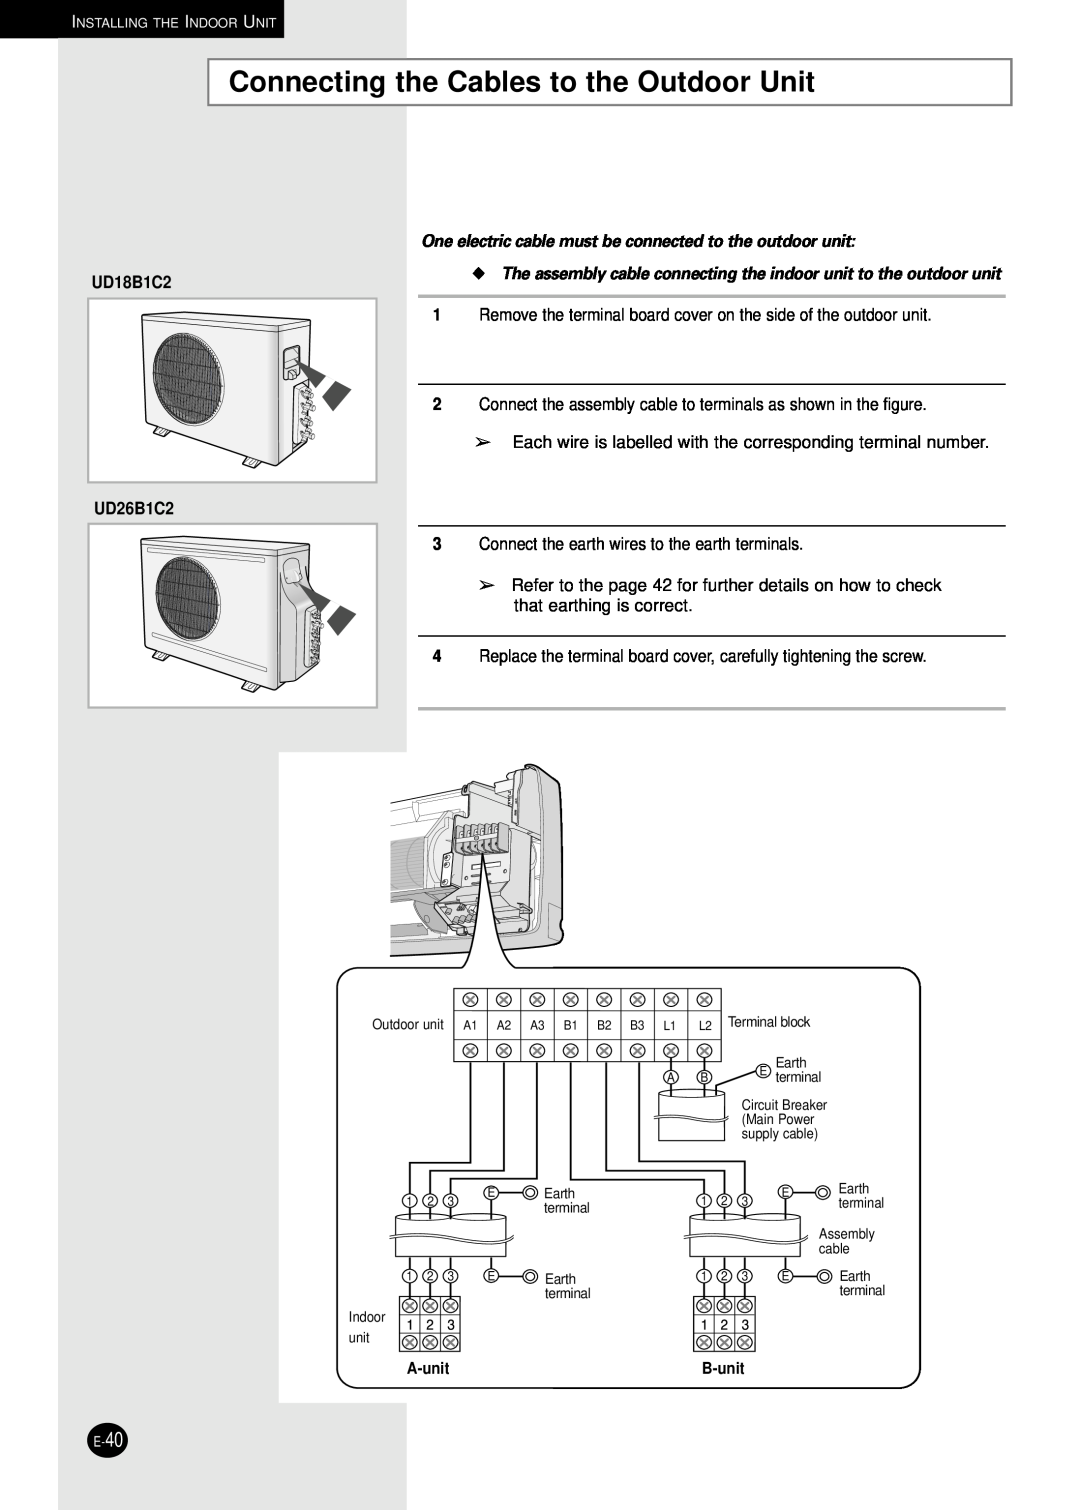 Samsung AD18B1C09 installation manual Connecting the Cables to the Outdoor Unit, UD26B1C2, A-unit, B-unit 